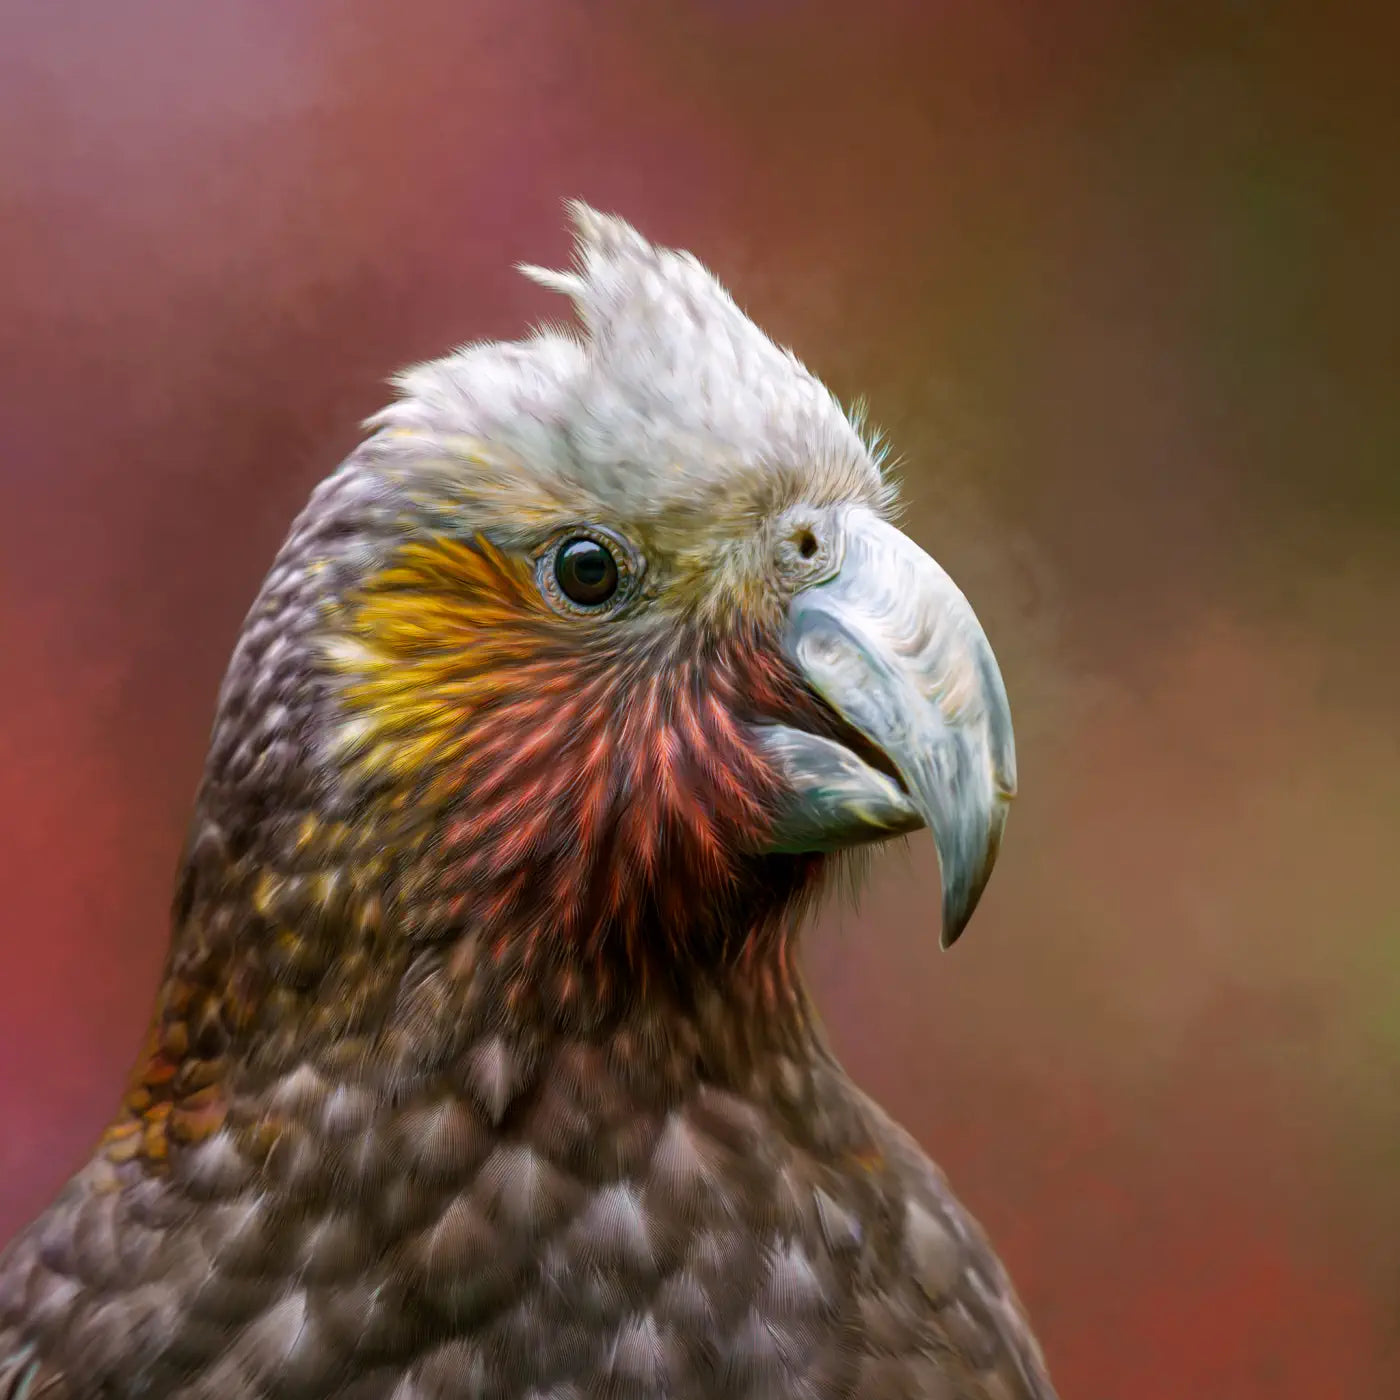 painting of a kākā parrot with head feathers fashioned into a mohawk